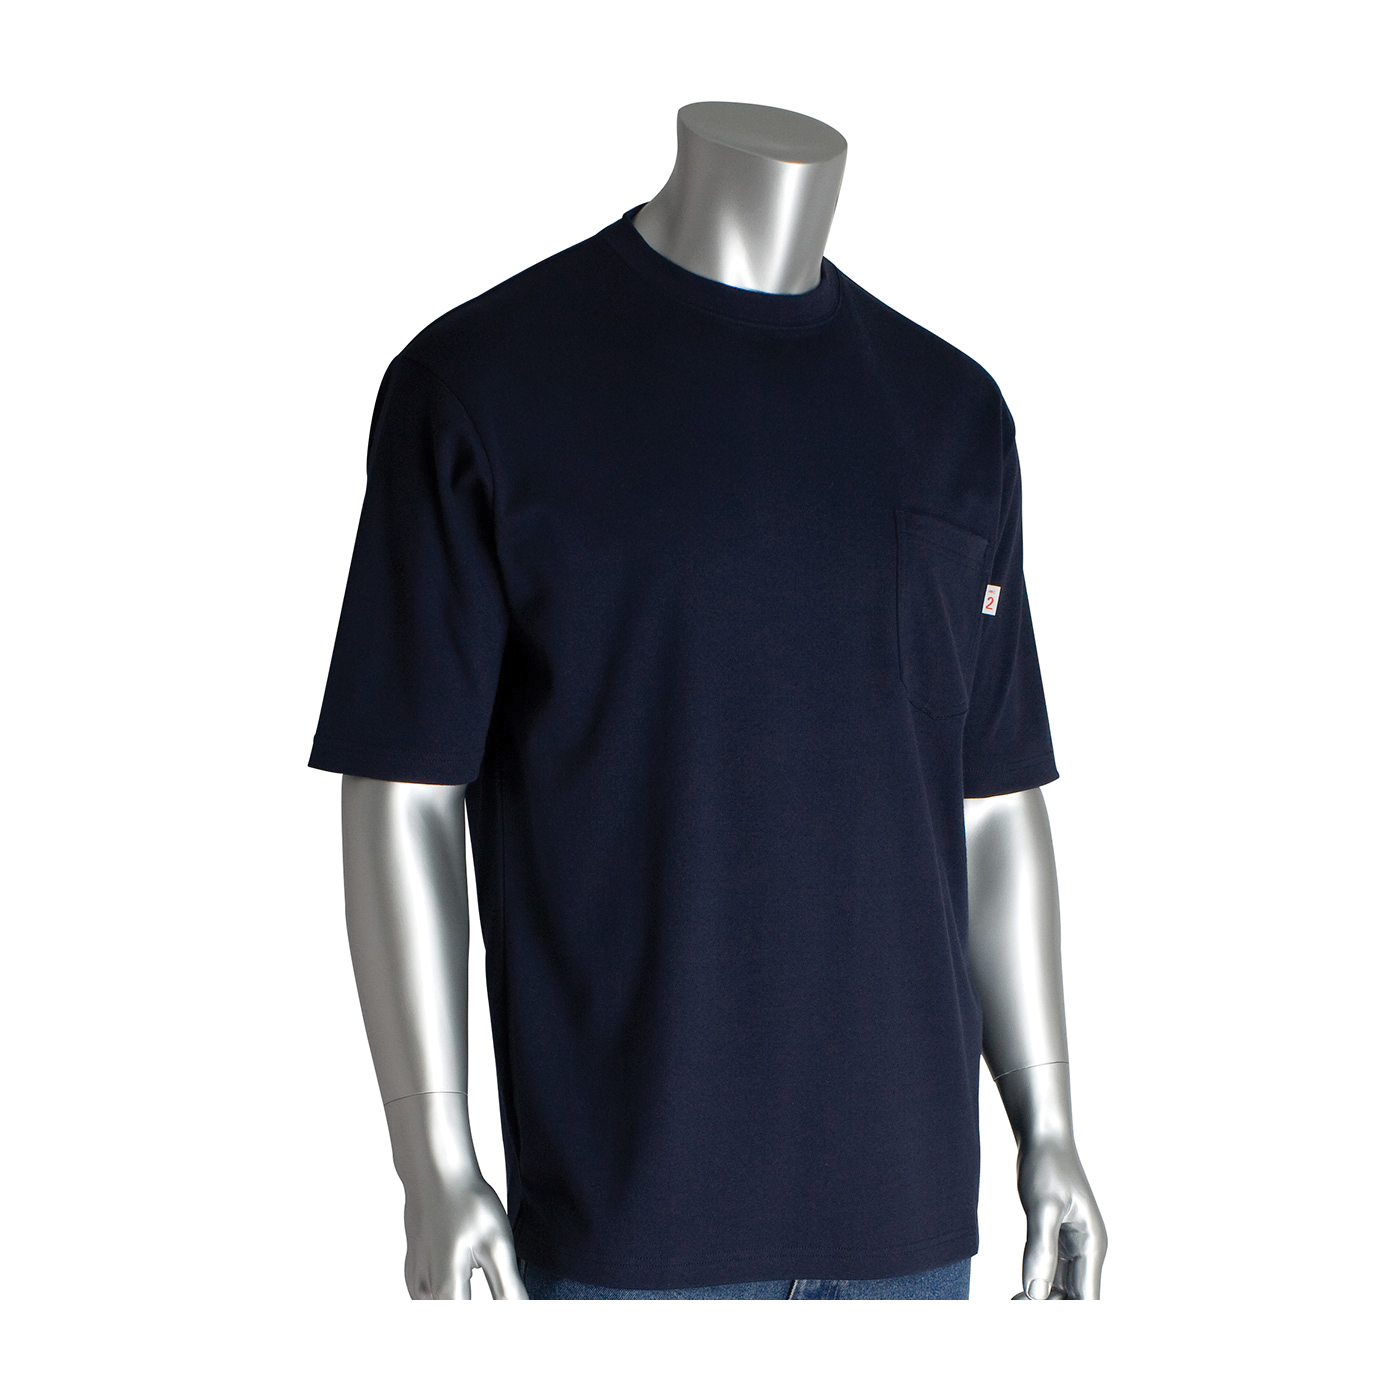 PIP® 385-FRSS-NV/2X Arc and Flame-Resistant Short Sleeve T-Shirt, 2XL, Navy, Cotton Interlock Knit, 33-1/2 in L